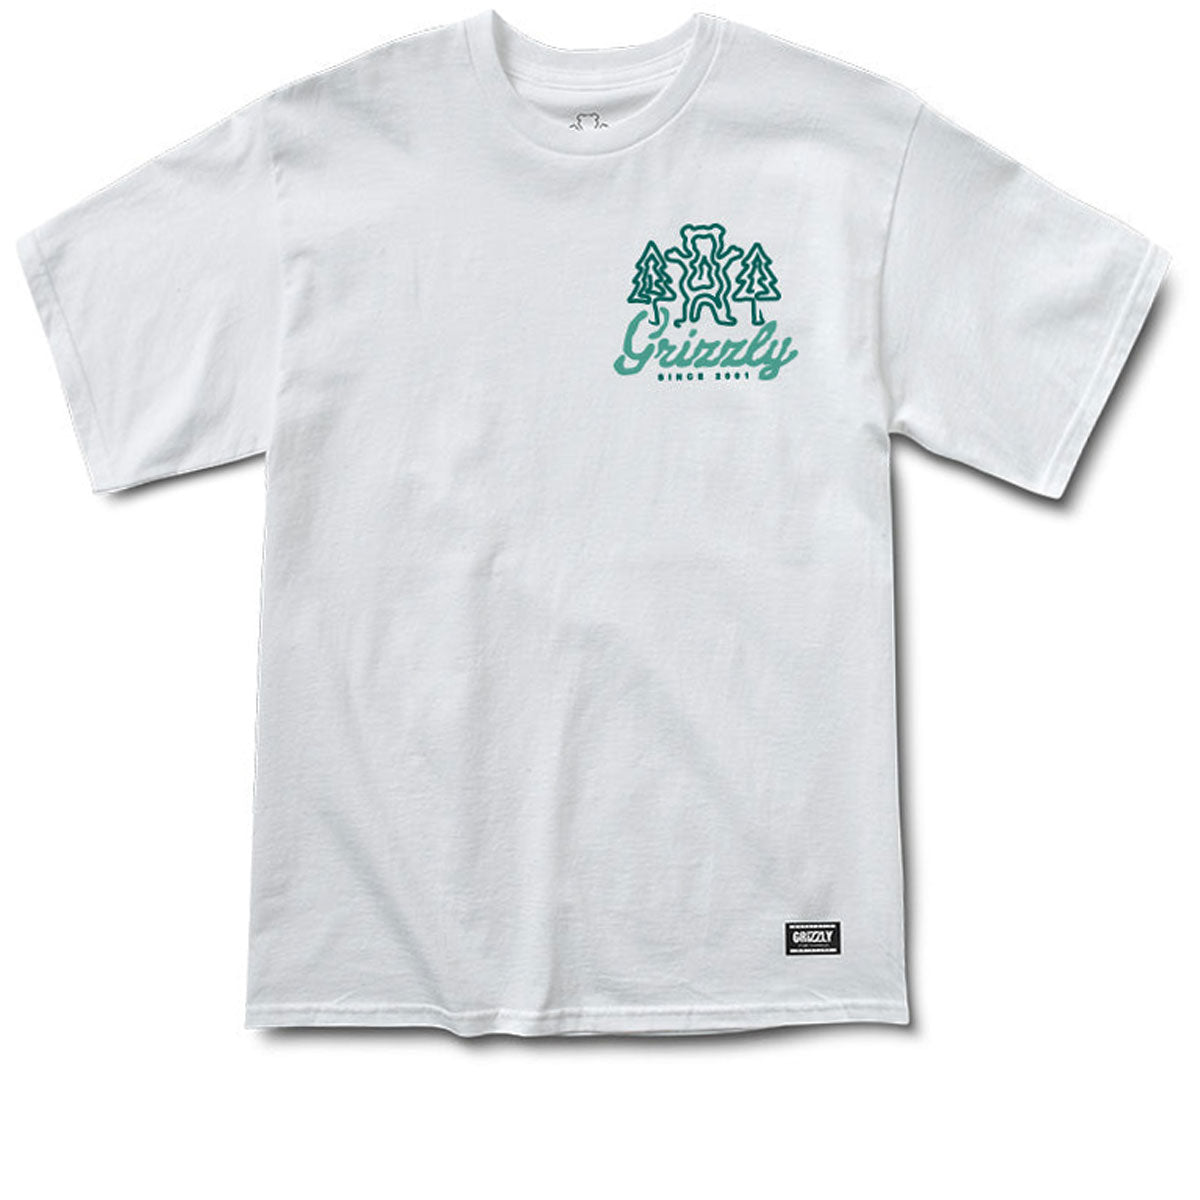 Grizzly Windy Creek T-Shirt - White image 2